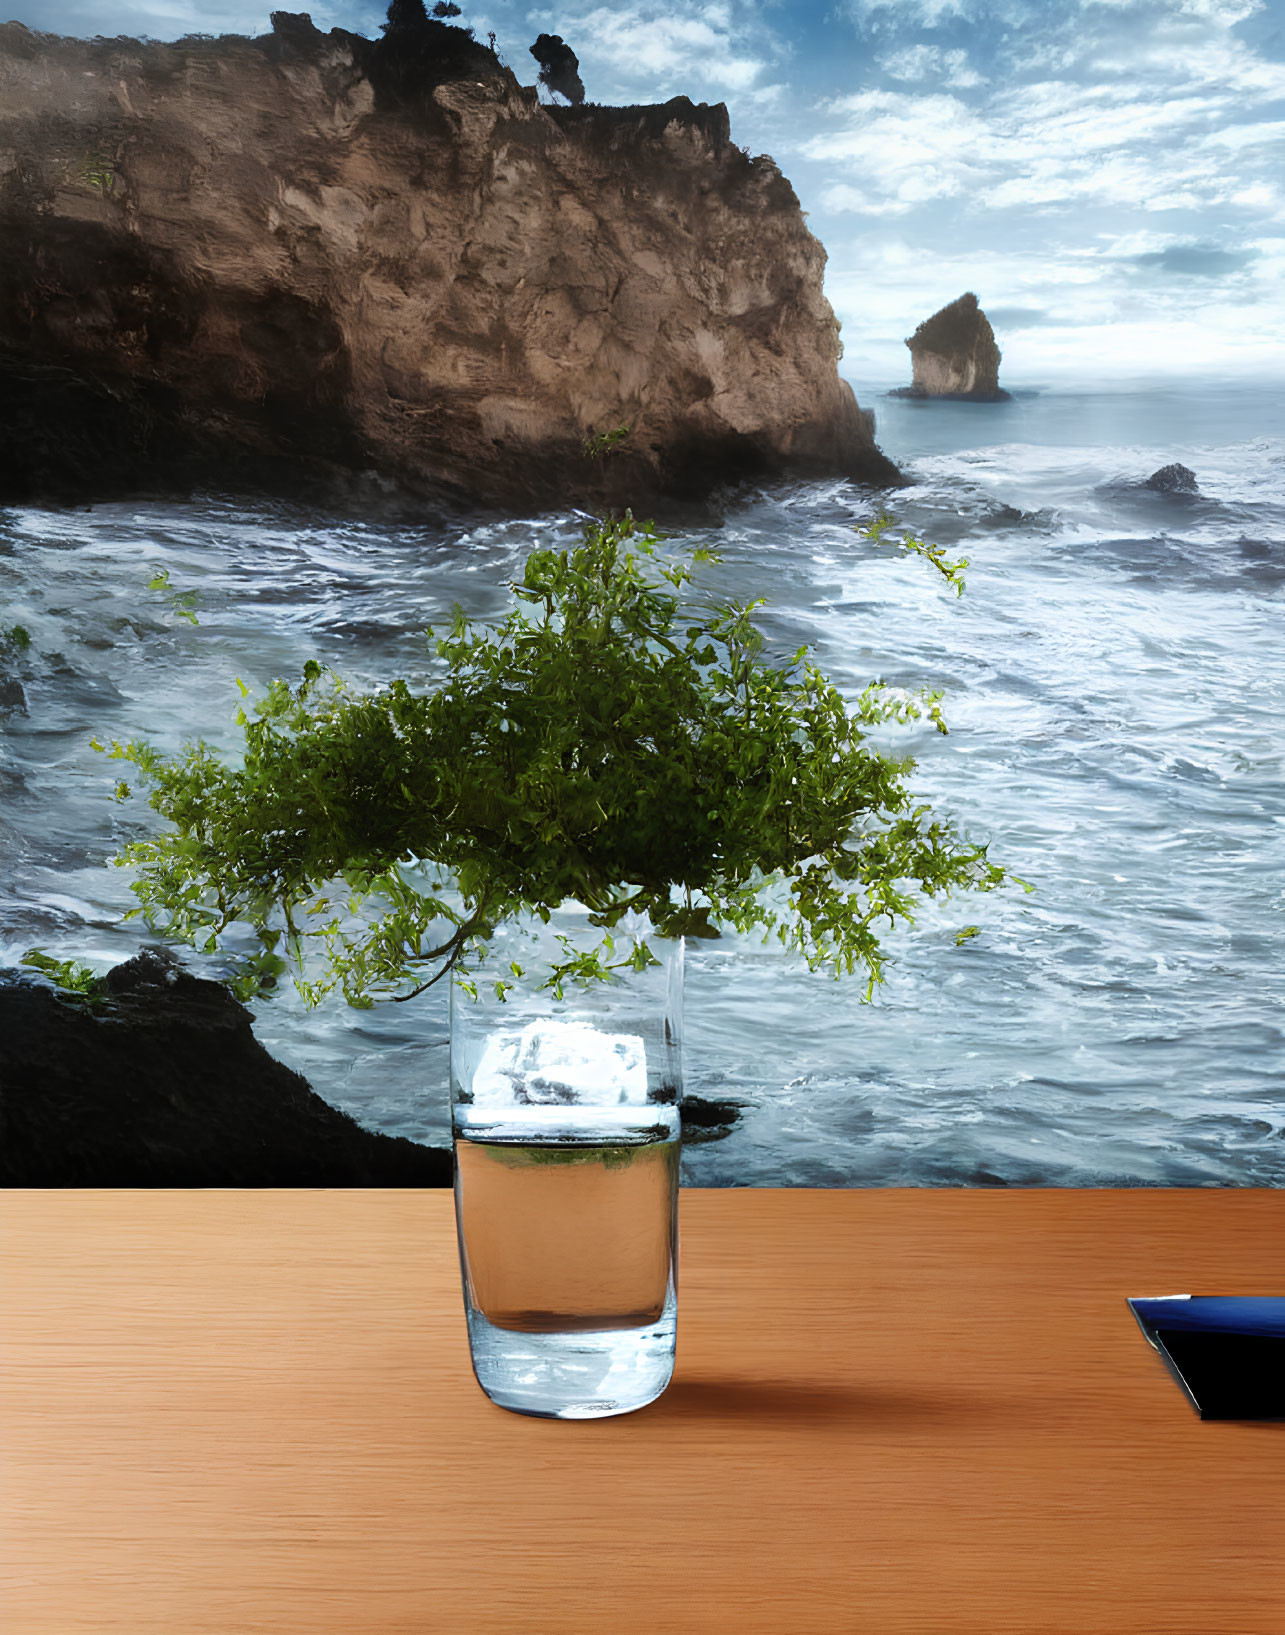 Glass of water on wooden desk with bonsai tree illusion and island landscape.